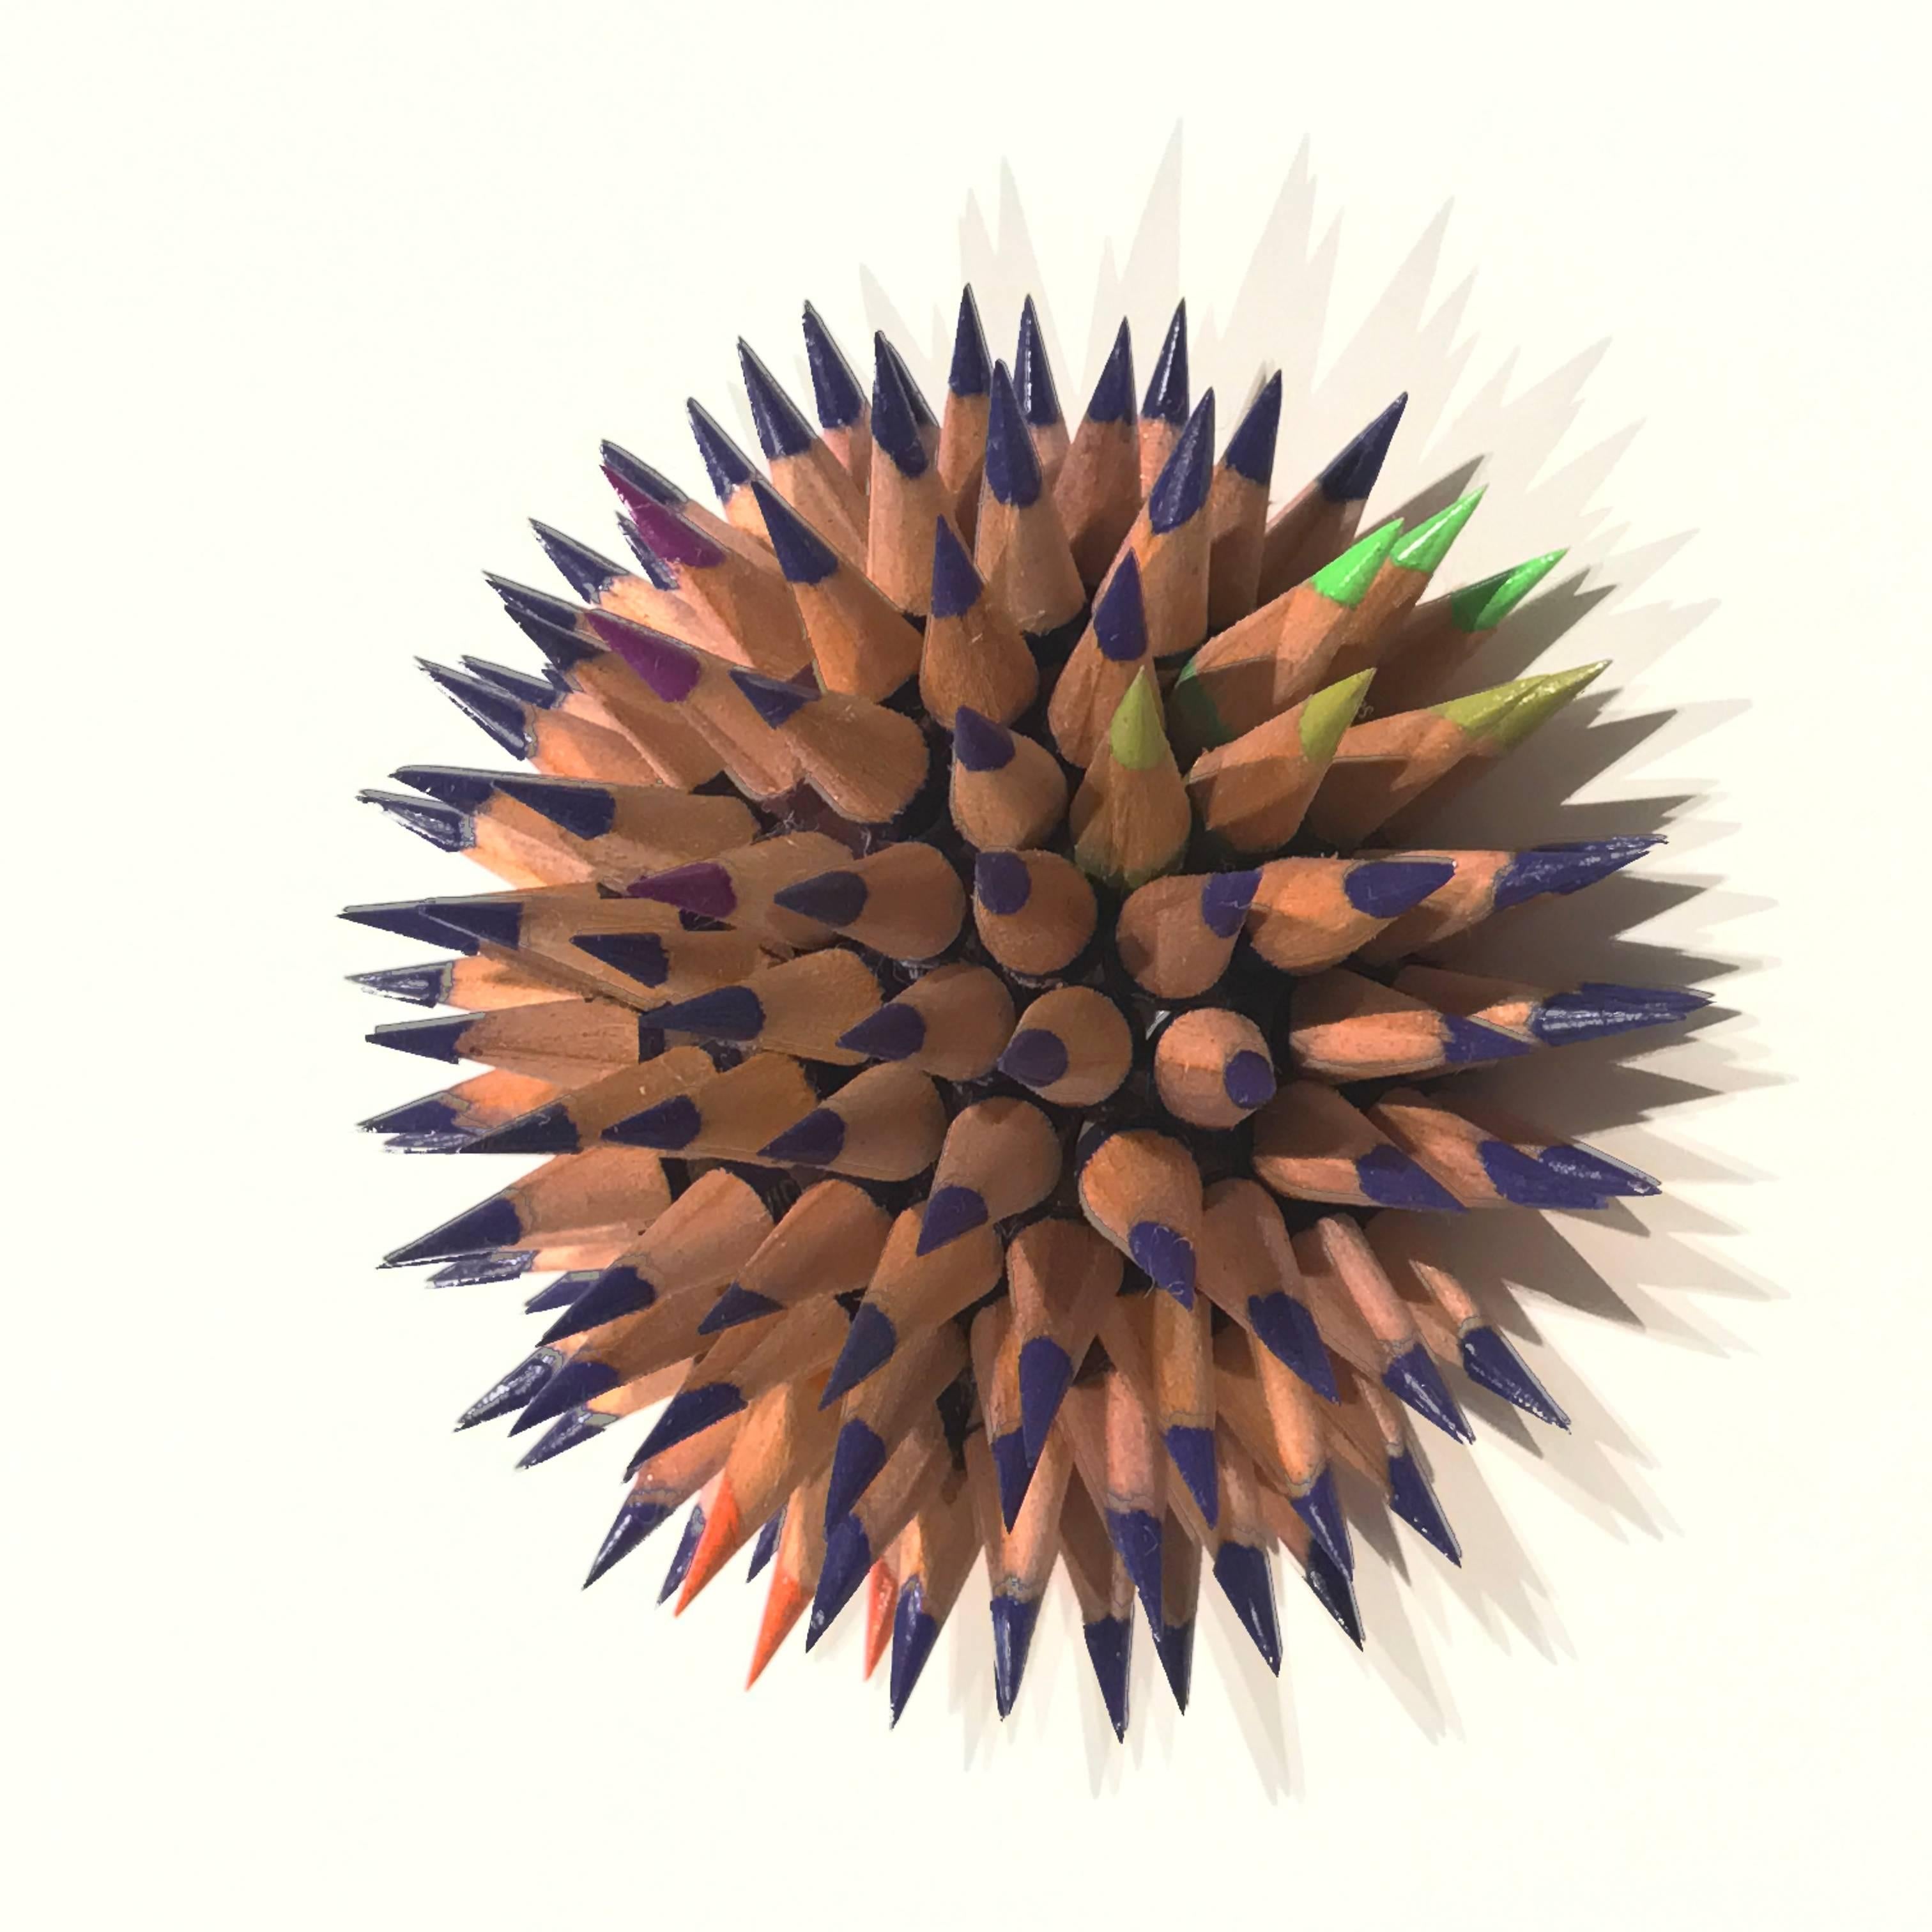 Indigo is the main color with highlights of fuschia, orange and lime green in this sculpture inspired by the sea. To make each sculpture pencils are chosen by color and cut into 1-inch sections. Holes are then drilled in each pencil, turning them